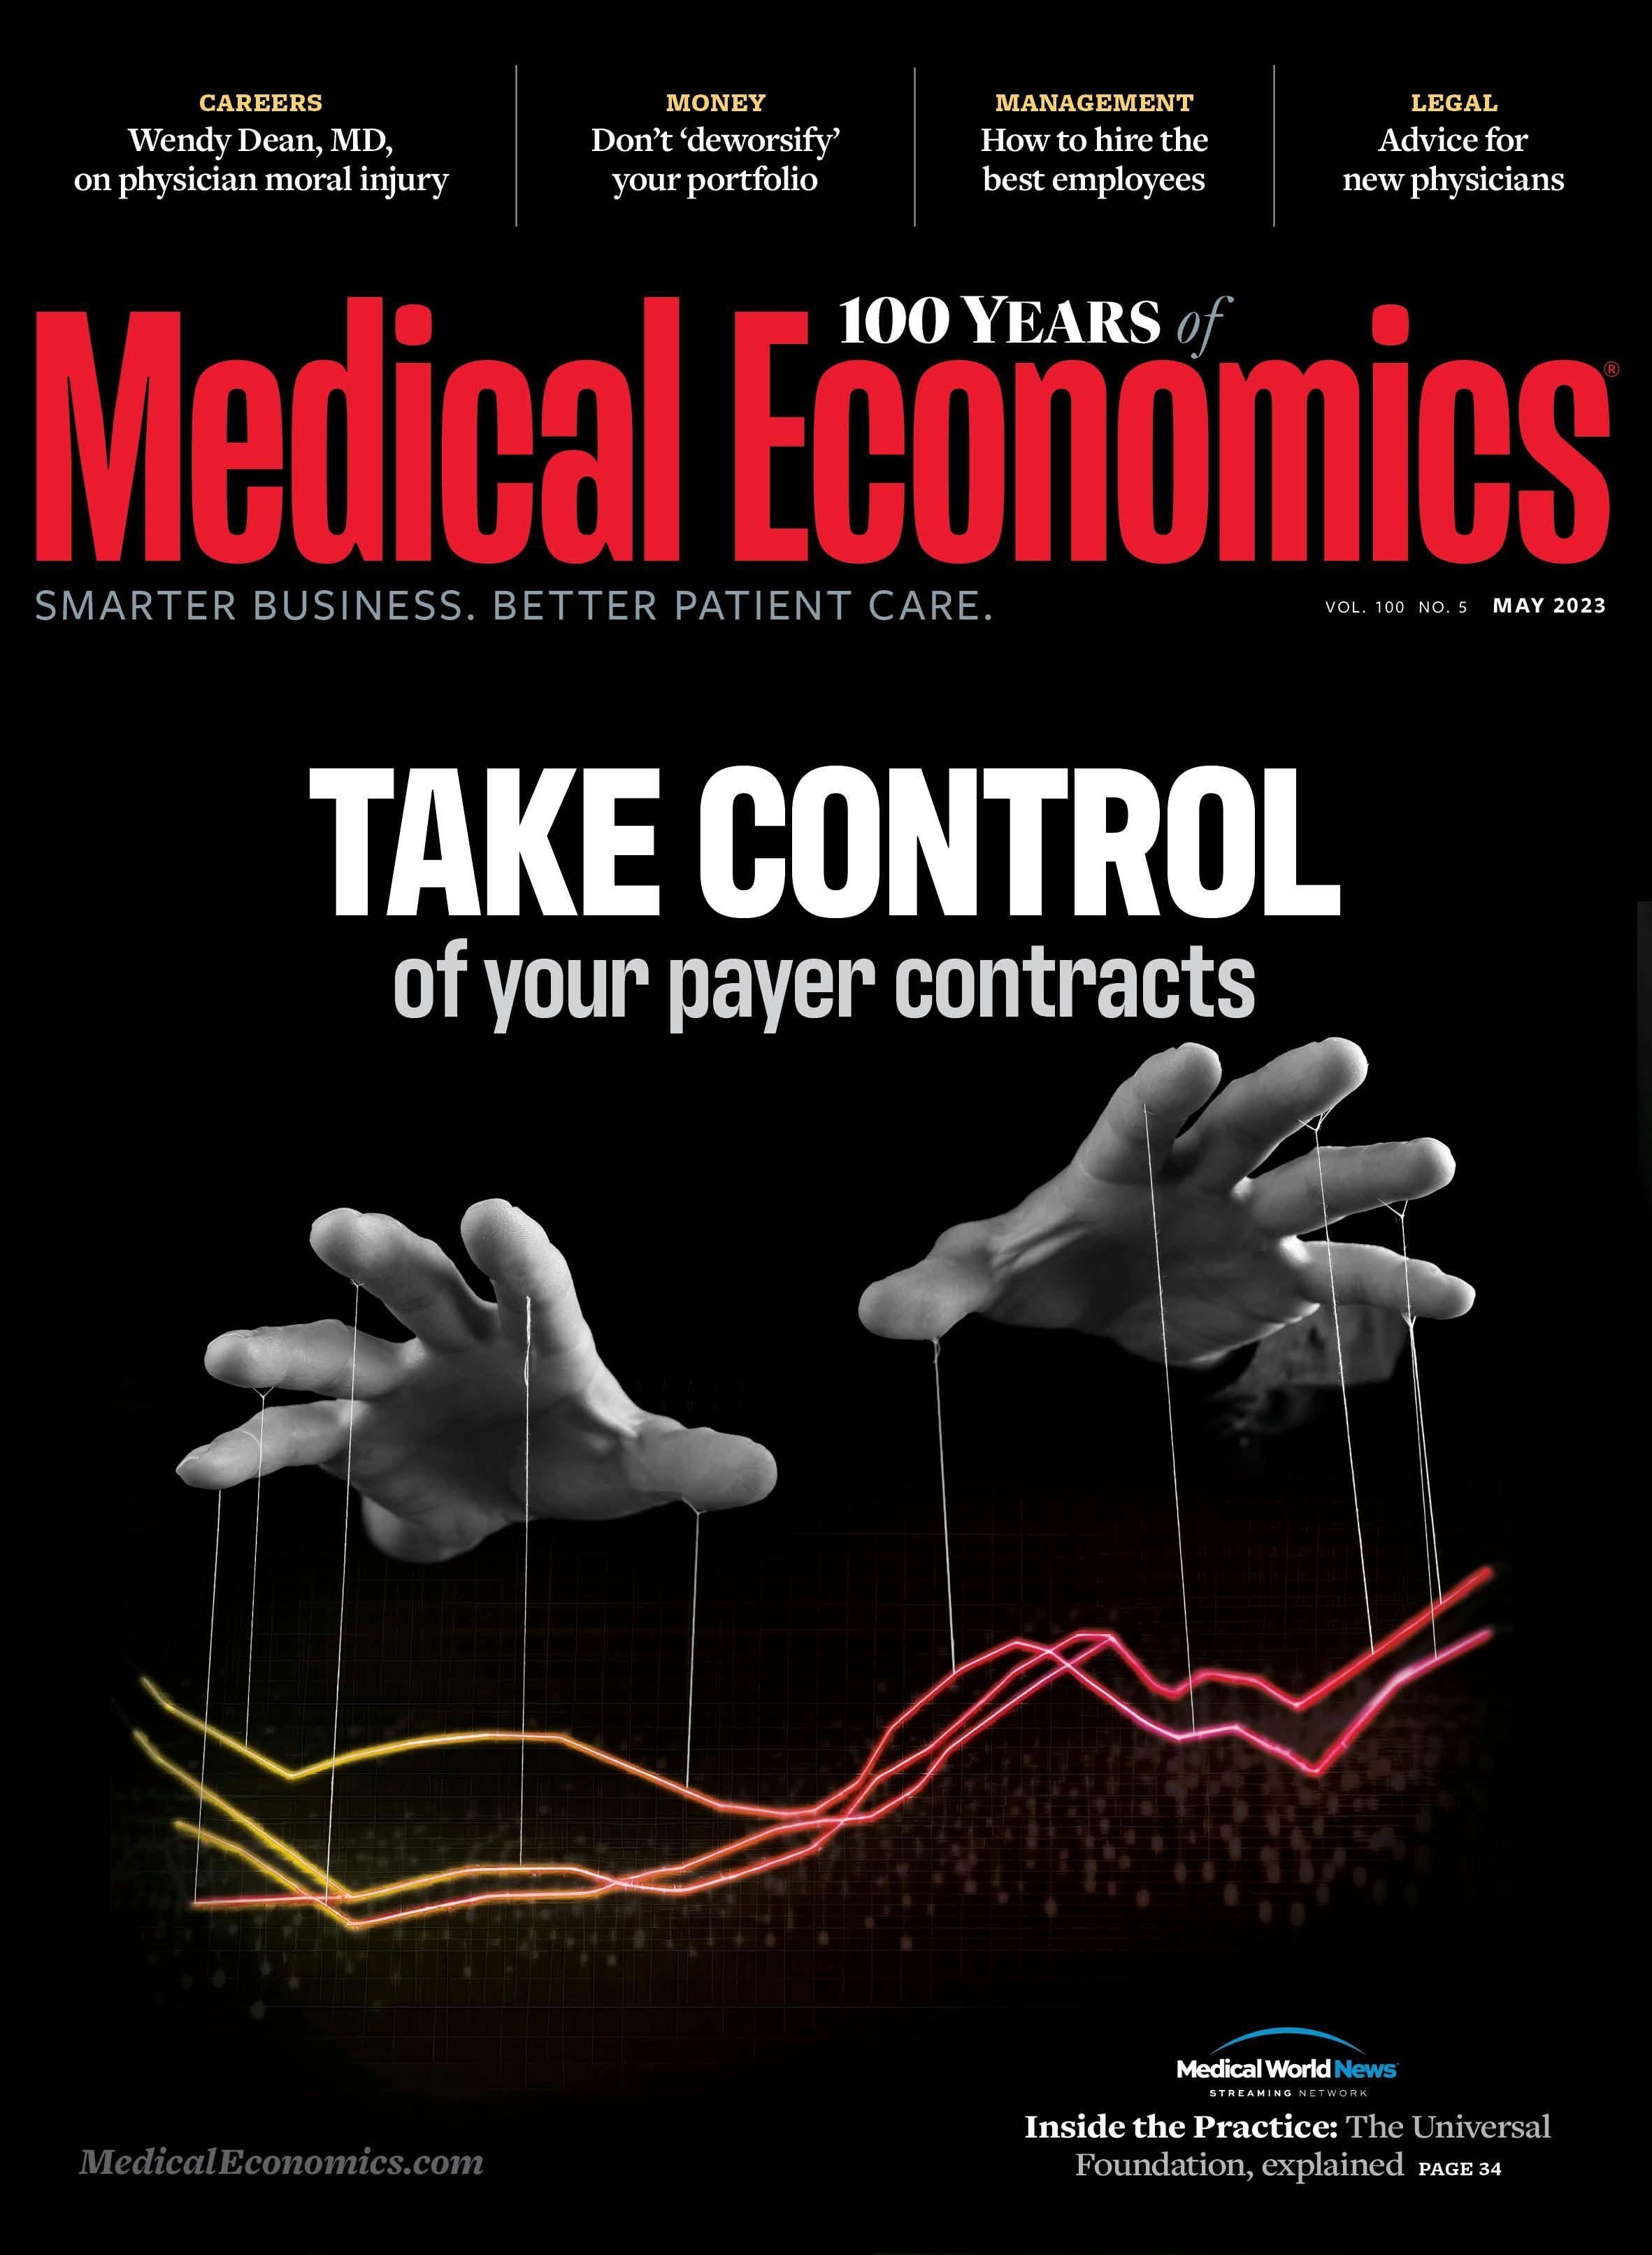 Take control of your payer contracts: Image Credit: ©Medical Economics